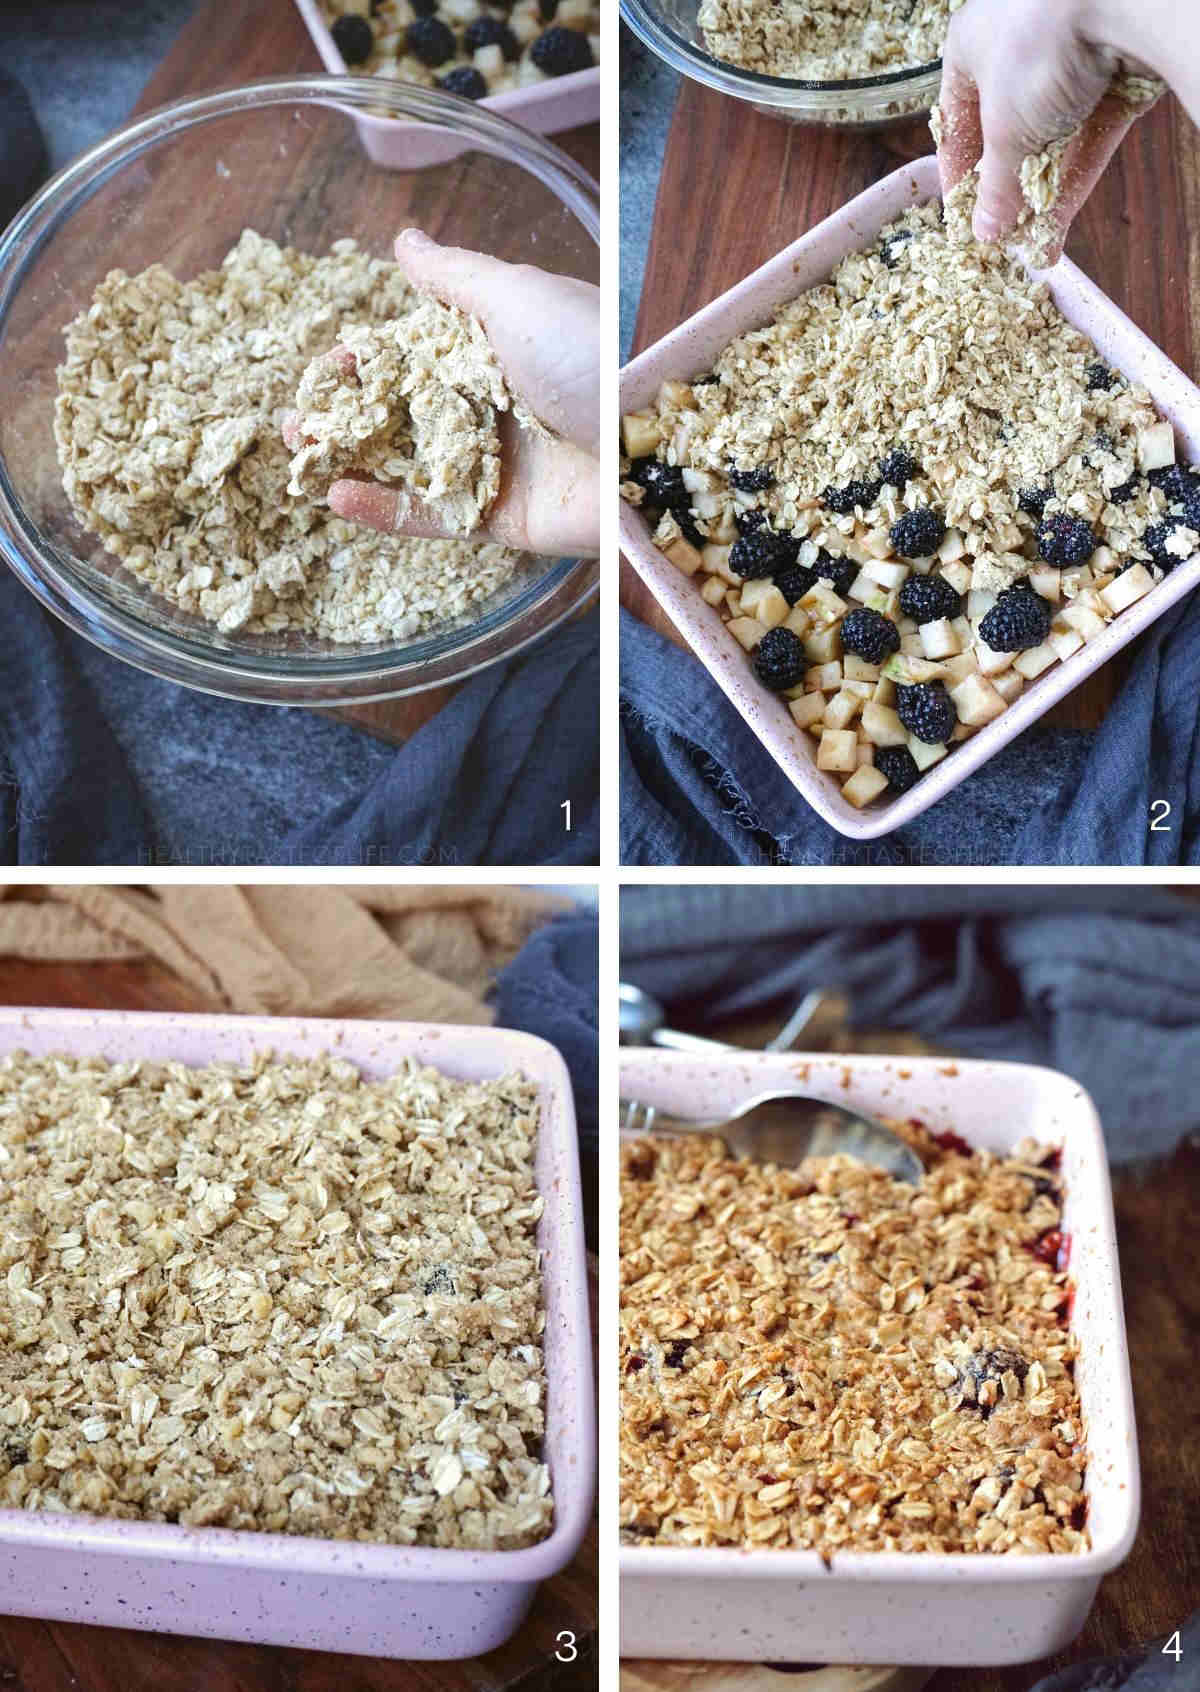 Step by step showing how to assemble the apple and blackberry crumble.